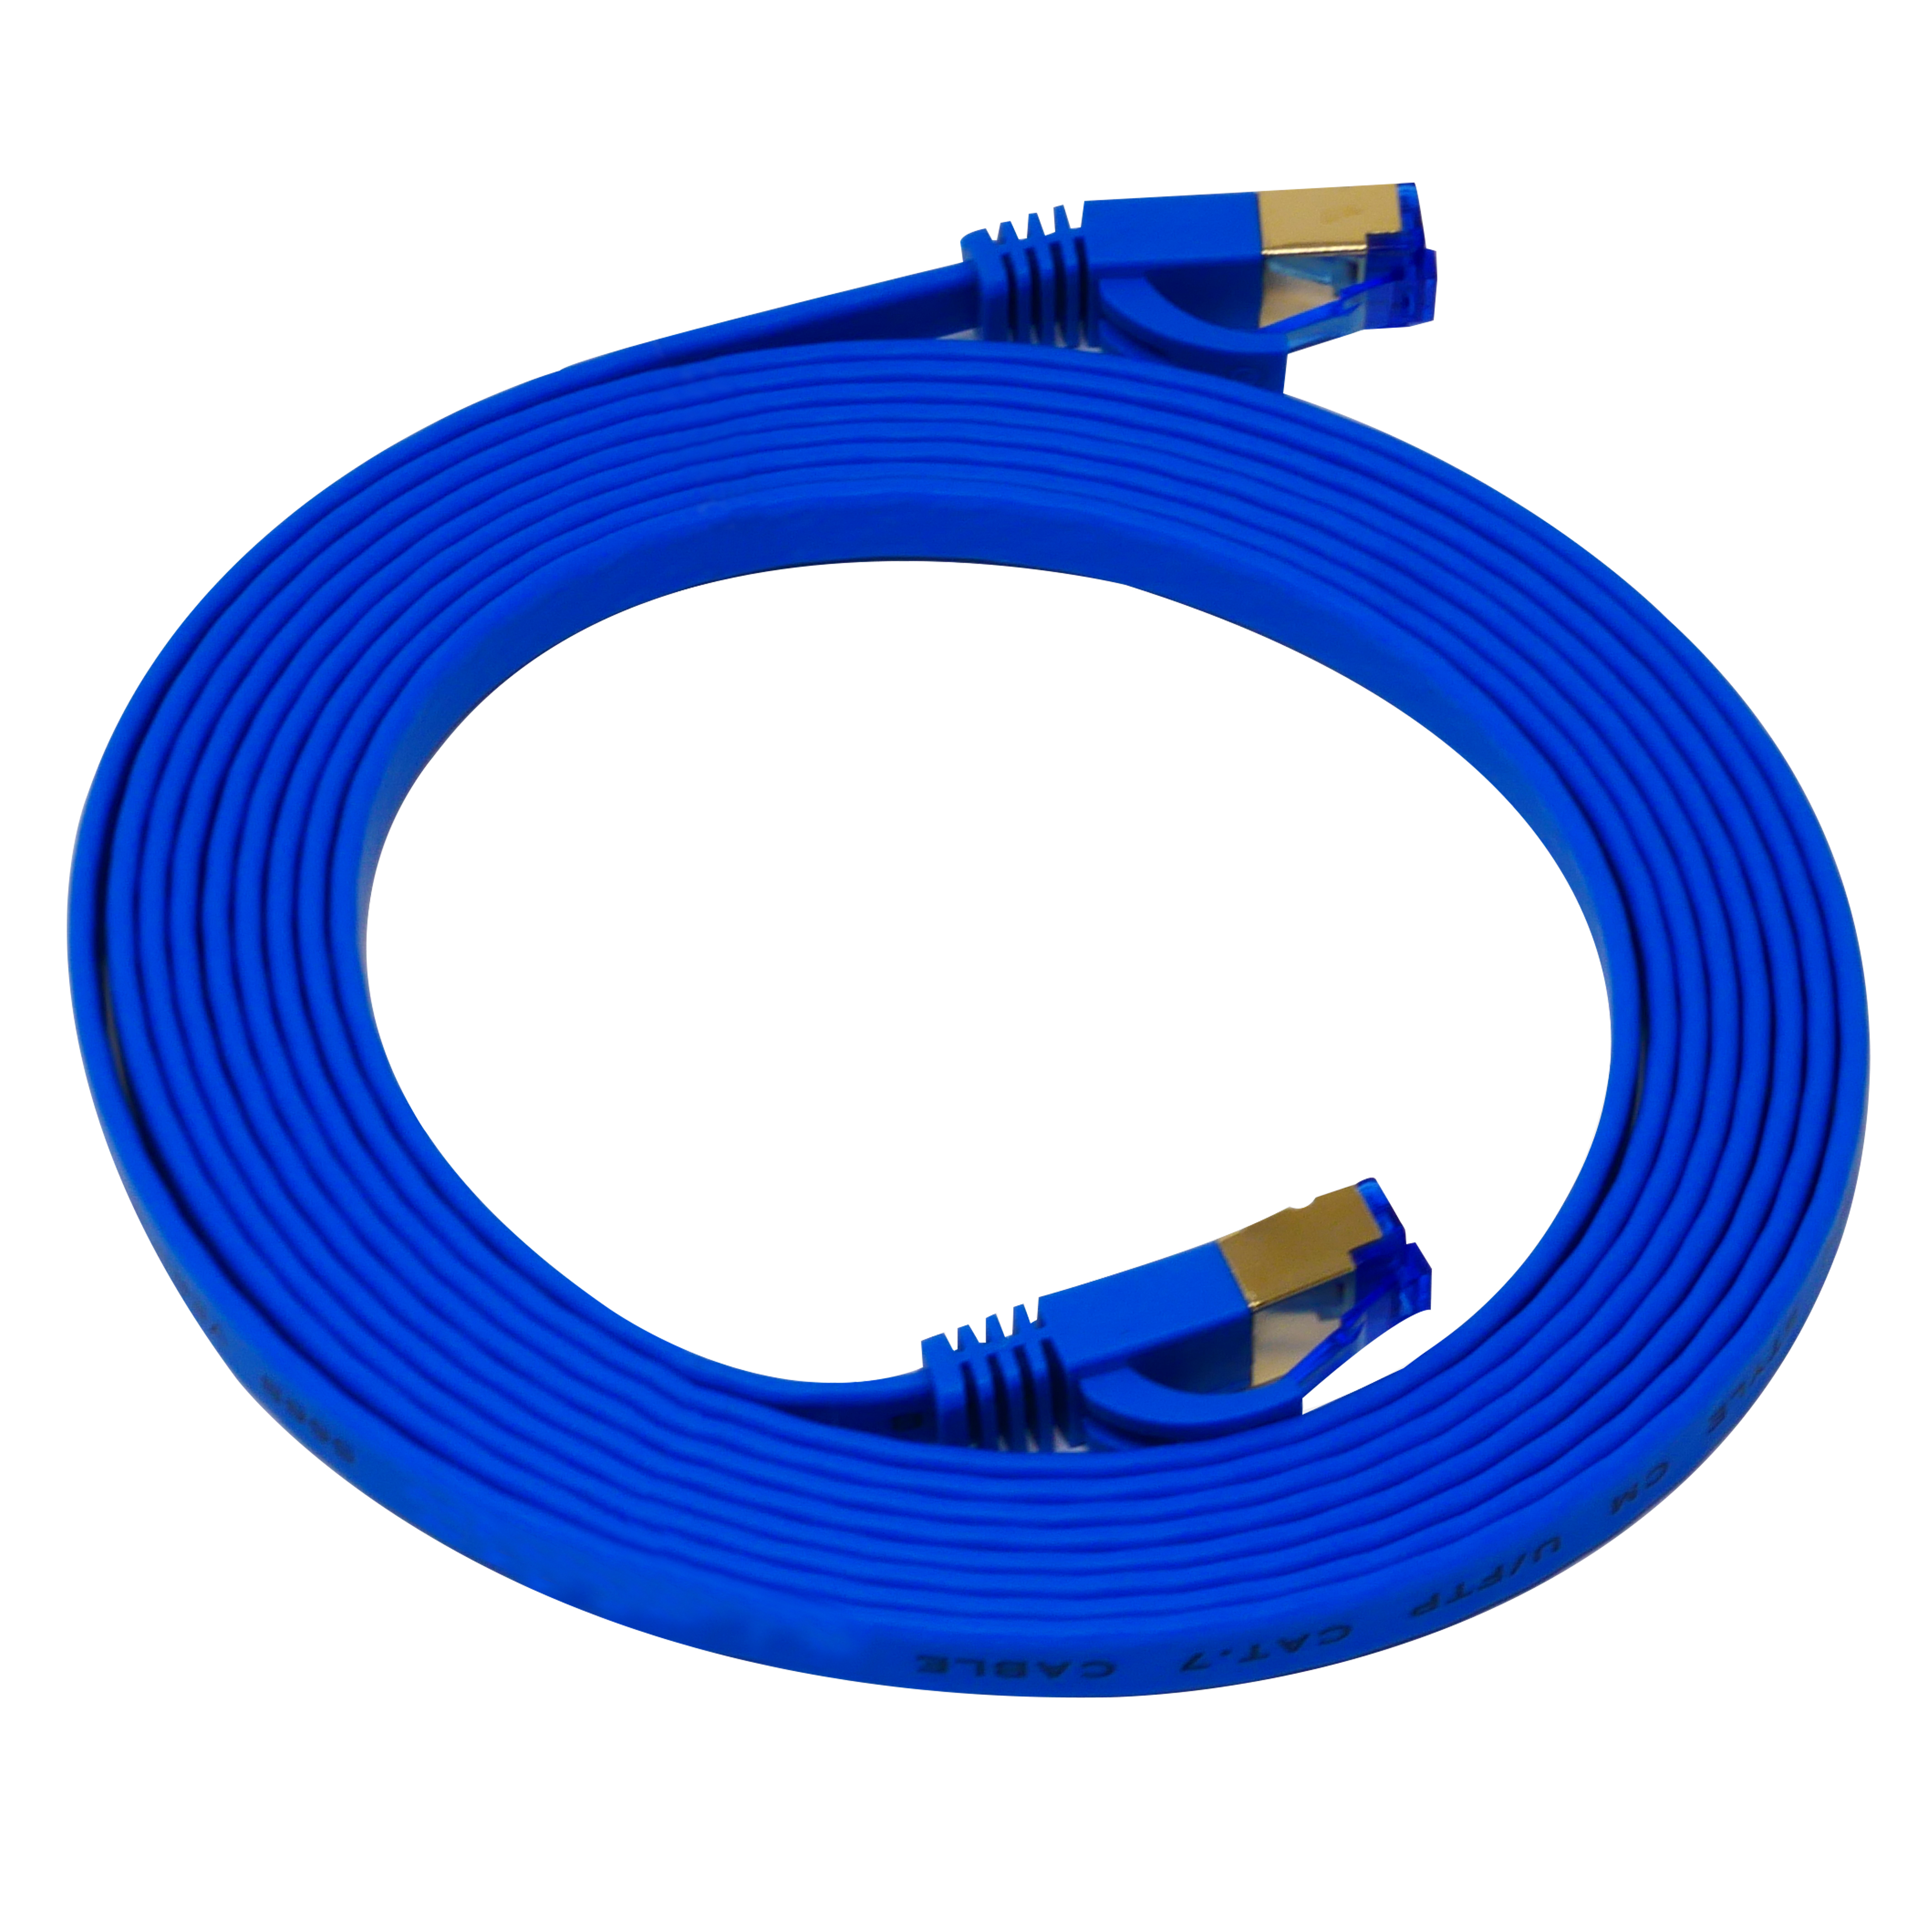 QualGear QG-CAT7F-10FT-BLU CAT 7 S/FTP Ethernet Cable Length 10 feet - 26 AWG, 10 Gbps, Gold Plated Contacts, RJ45, 99.99% OFC Copper, Color Blue 